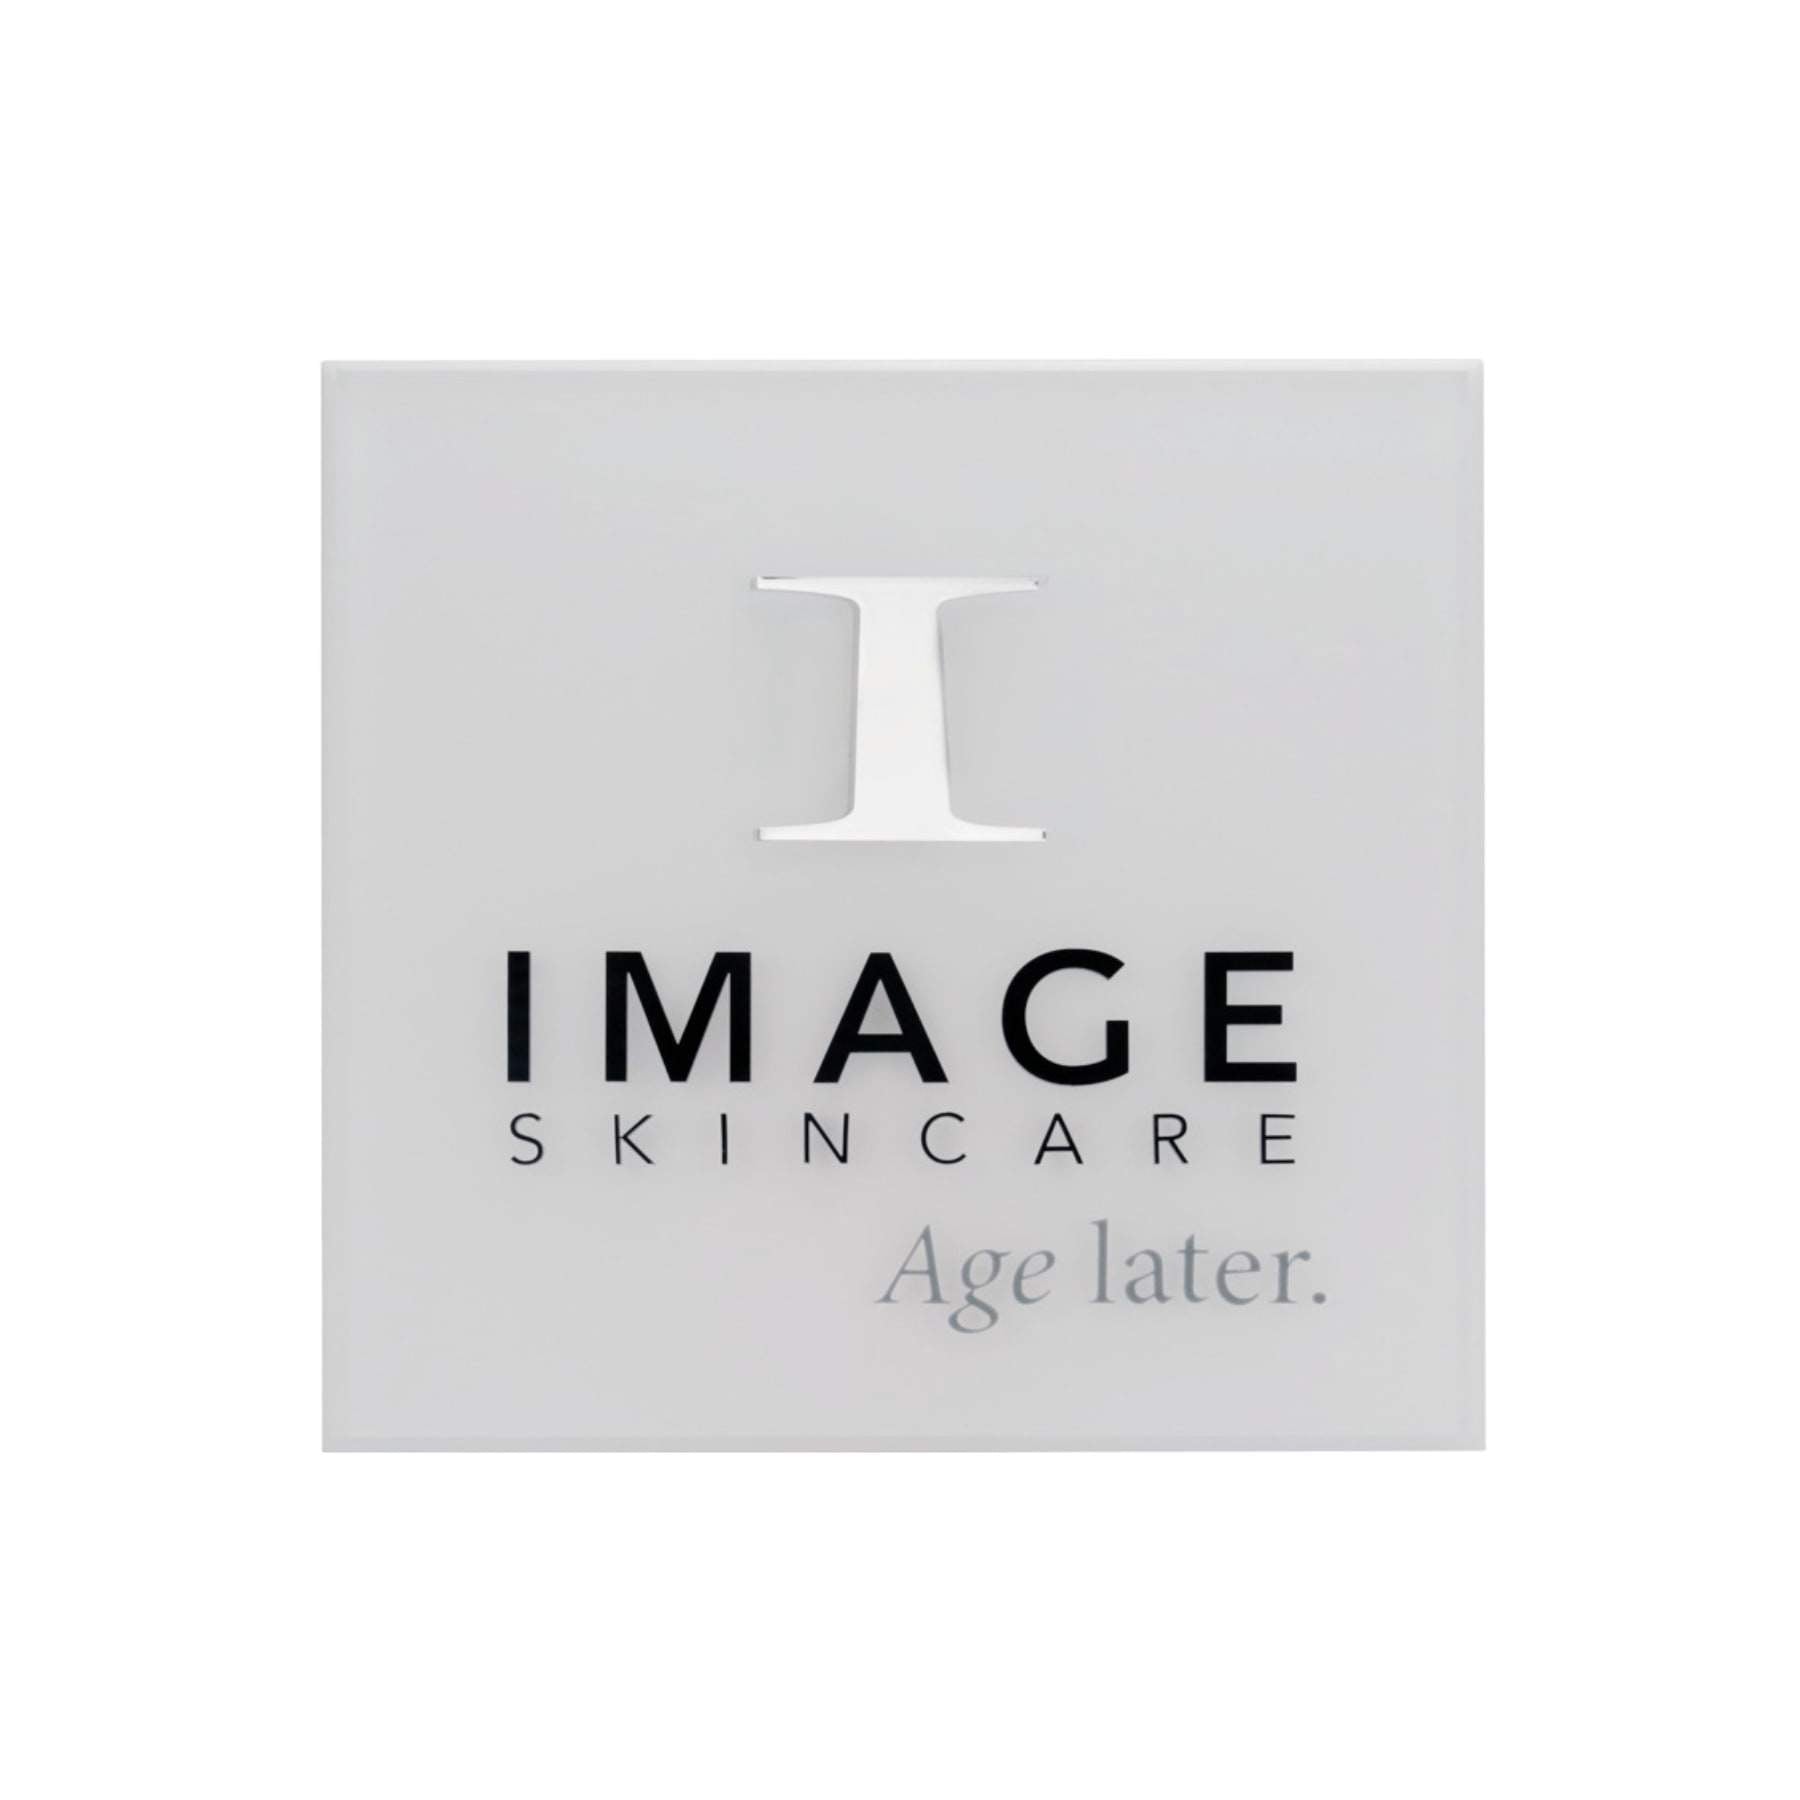 IMAGE Skincare Wall Plaque - ID-104